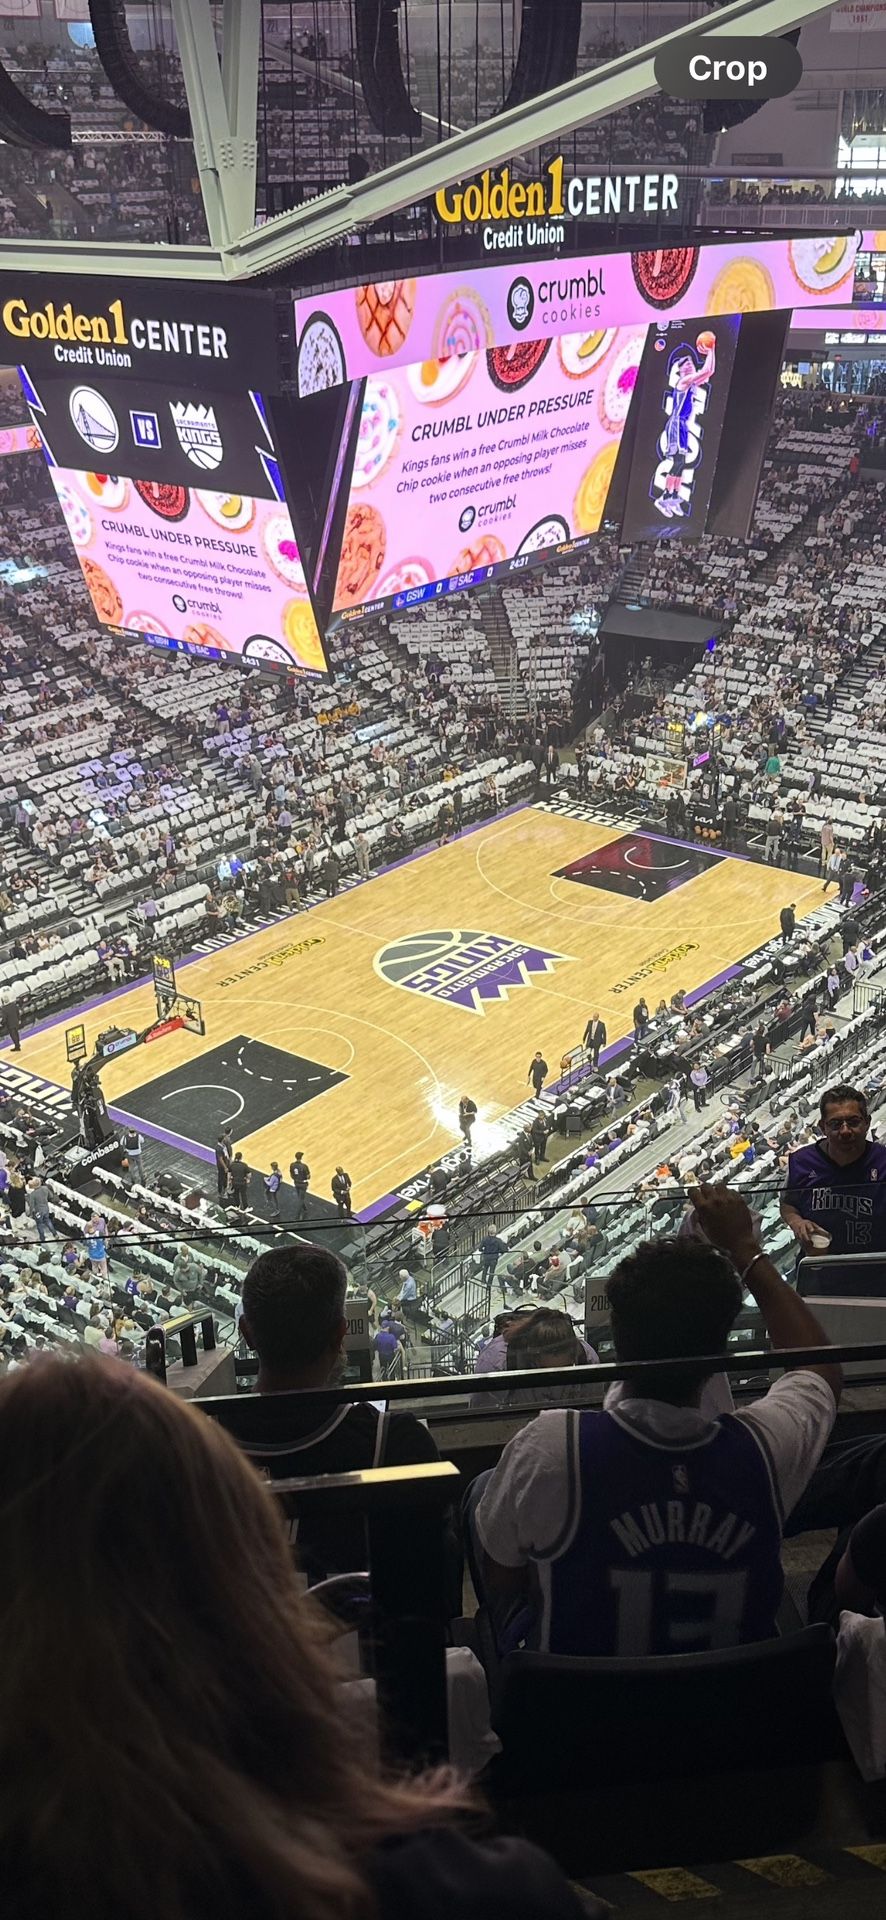 Kings Tickets For Play In And Playoffs!! Picture Is From The Seats!